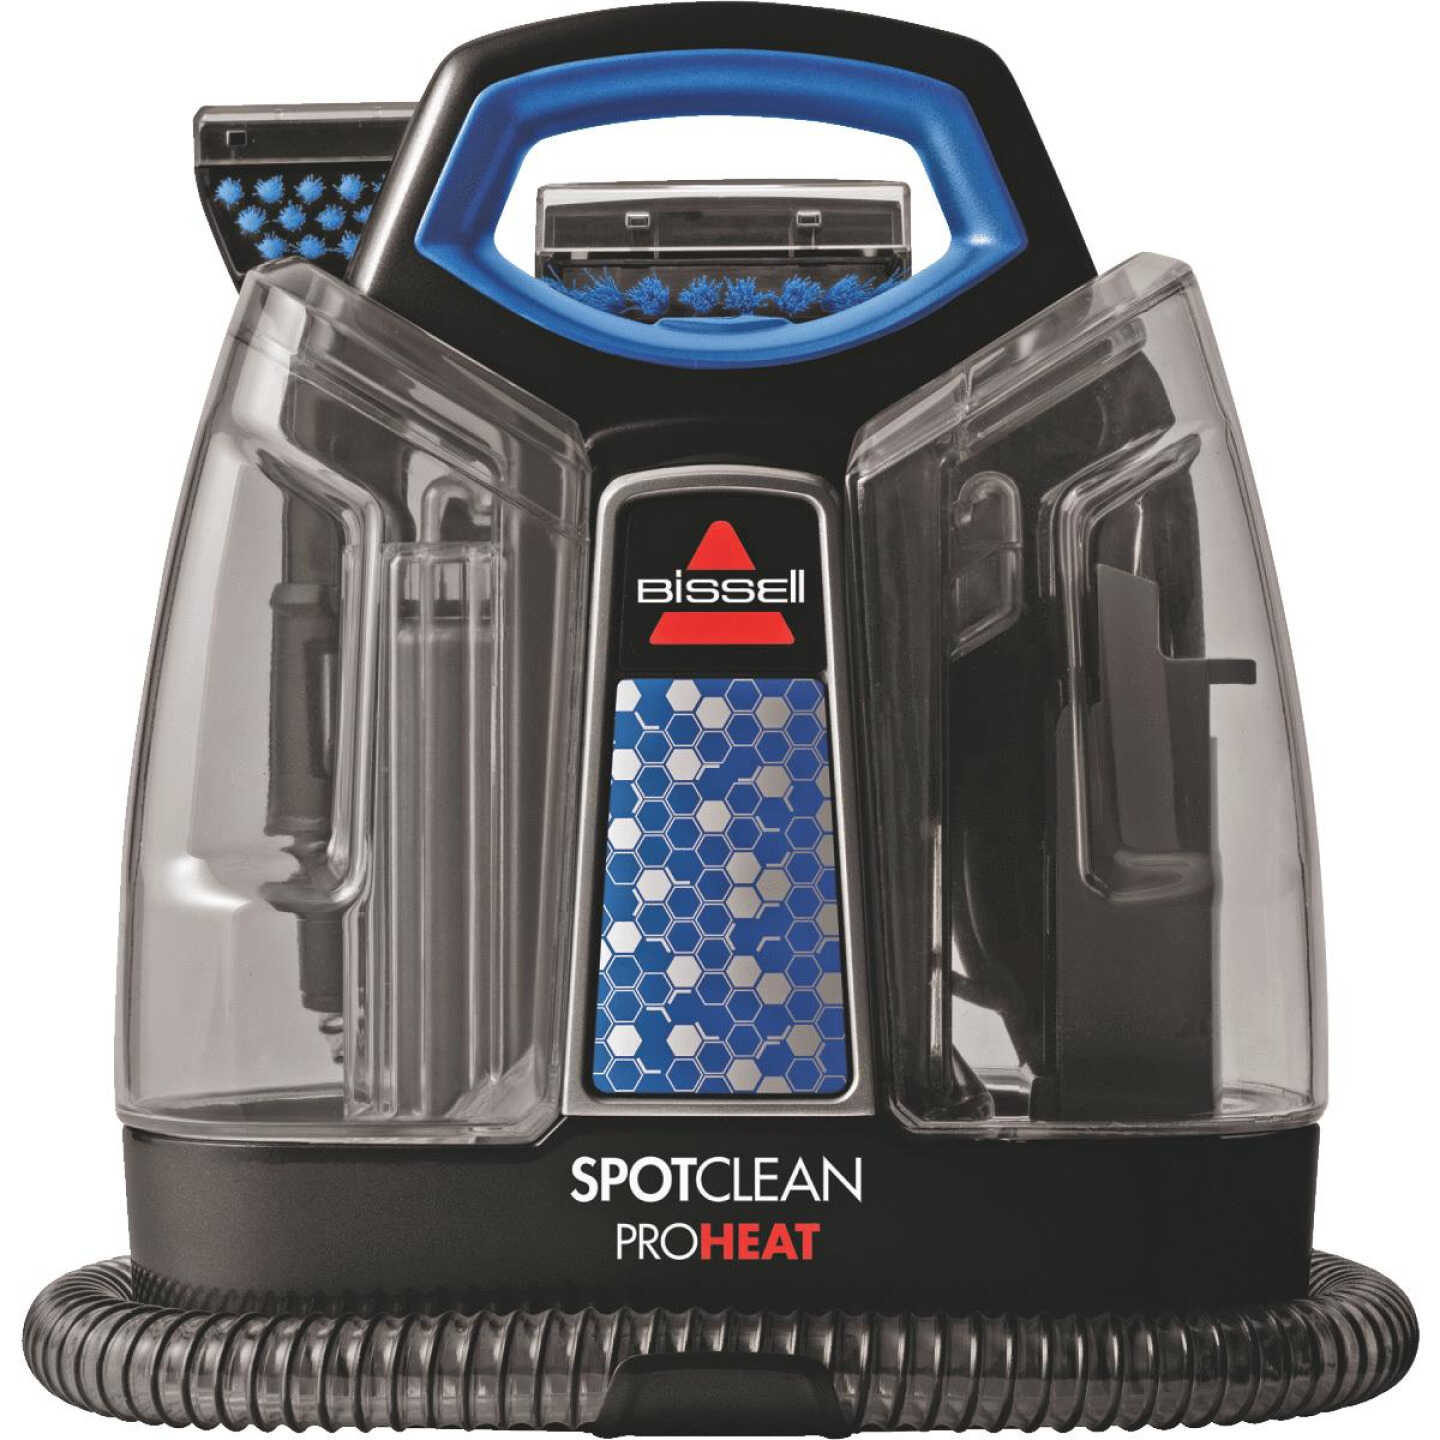 Bissell Spotclean ProHeat Portable Carpet Cleaner Machine